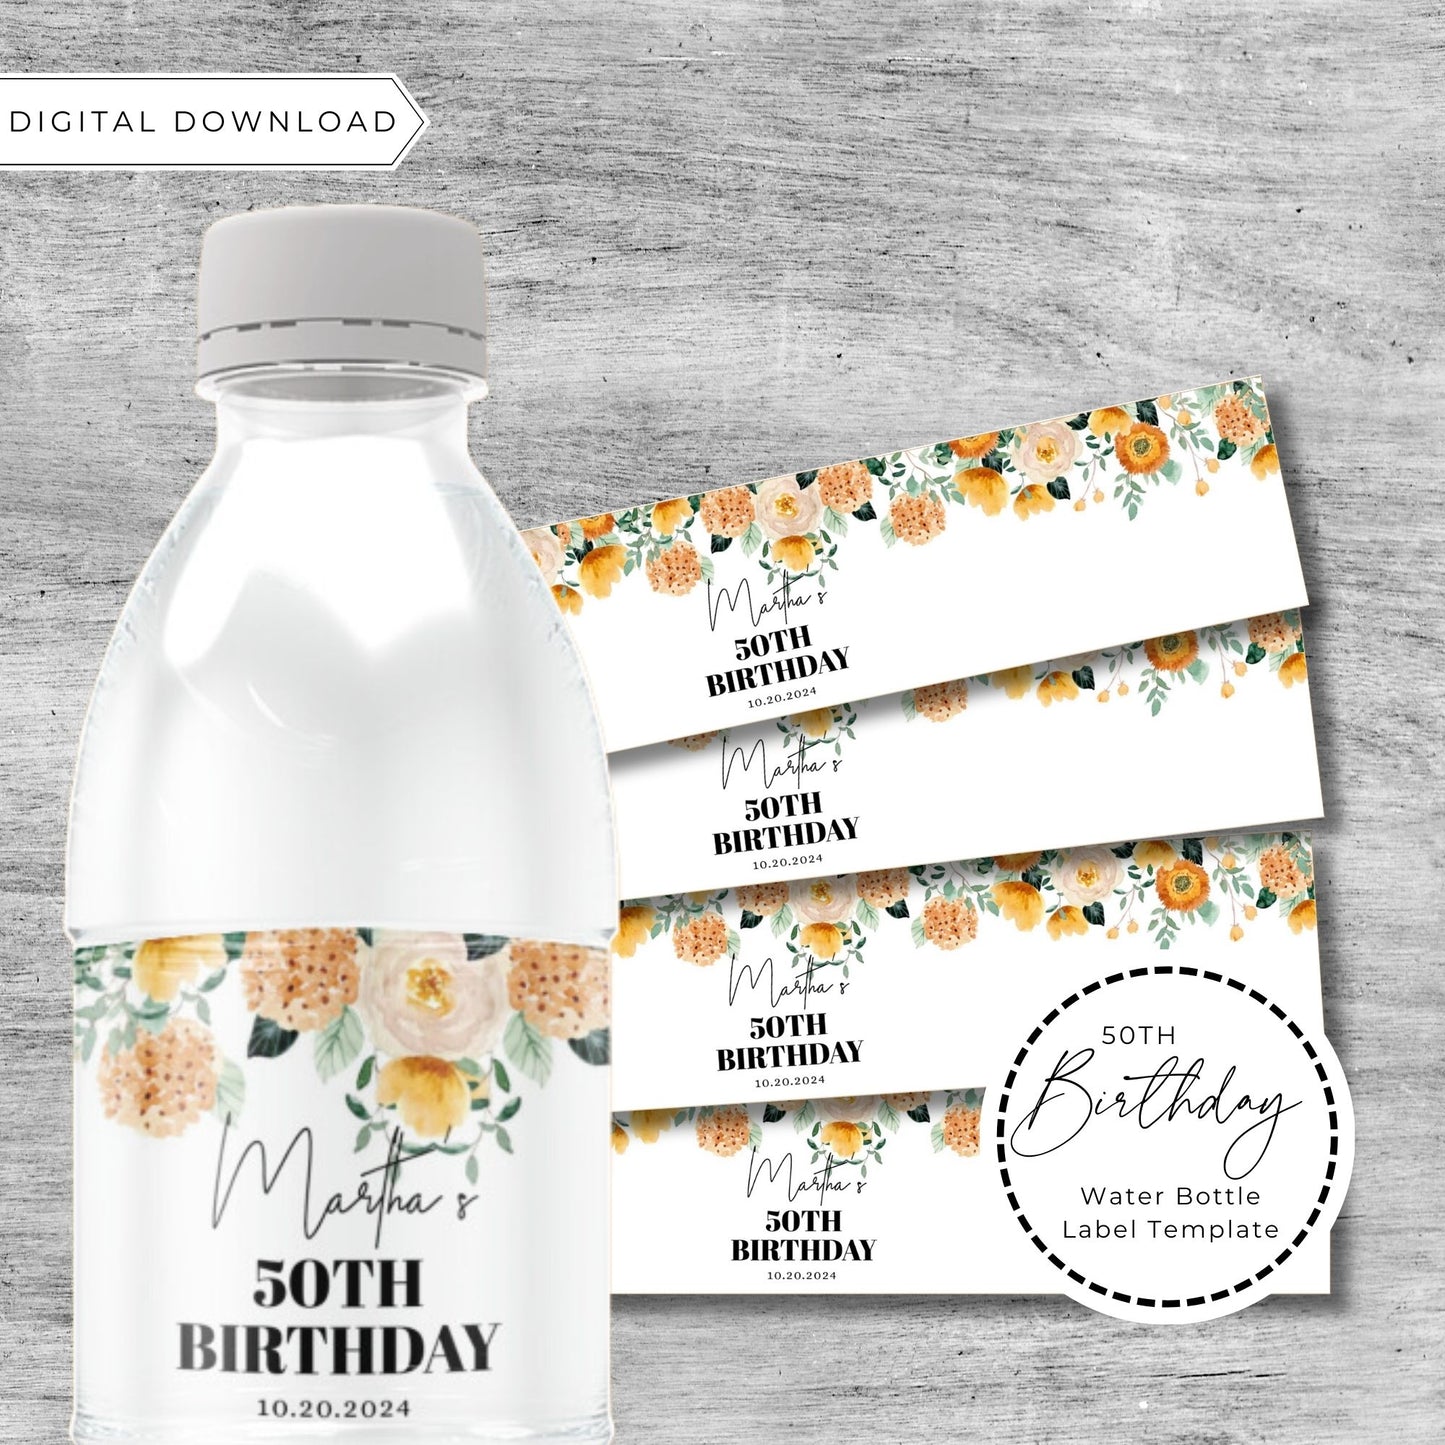 50TH Birthday Water Bottle Label Template